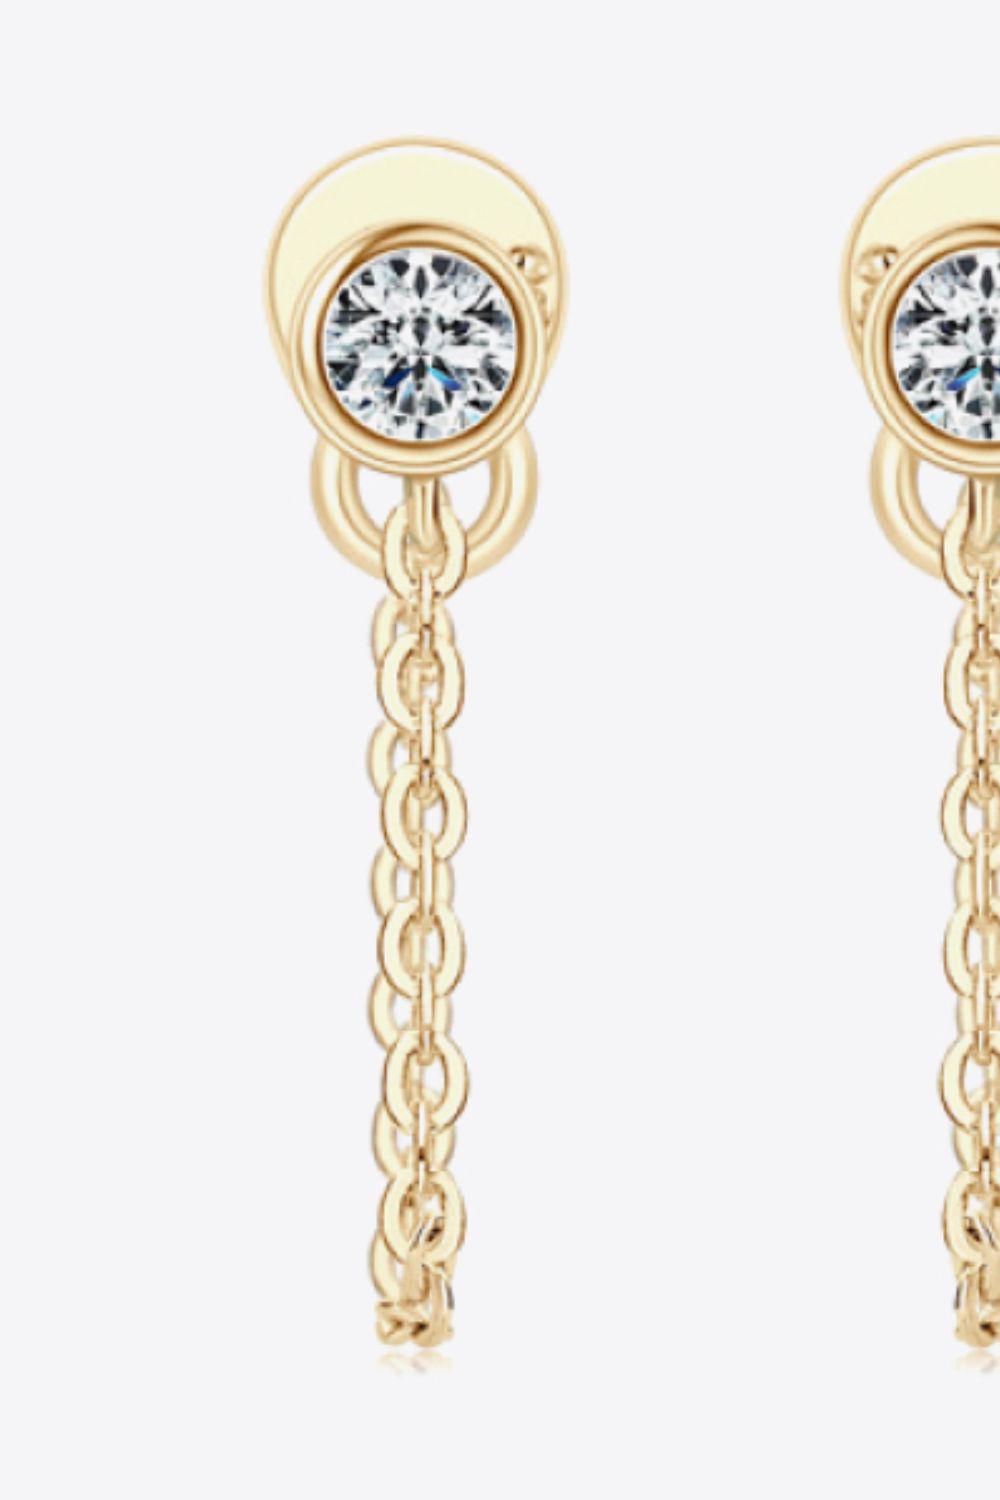 Inlaid Moissanite Chain Earrings BLUE ZONE PLANET